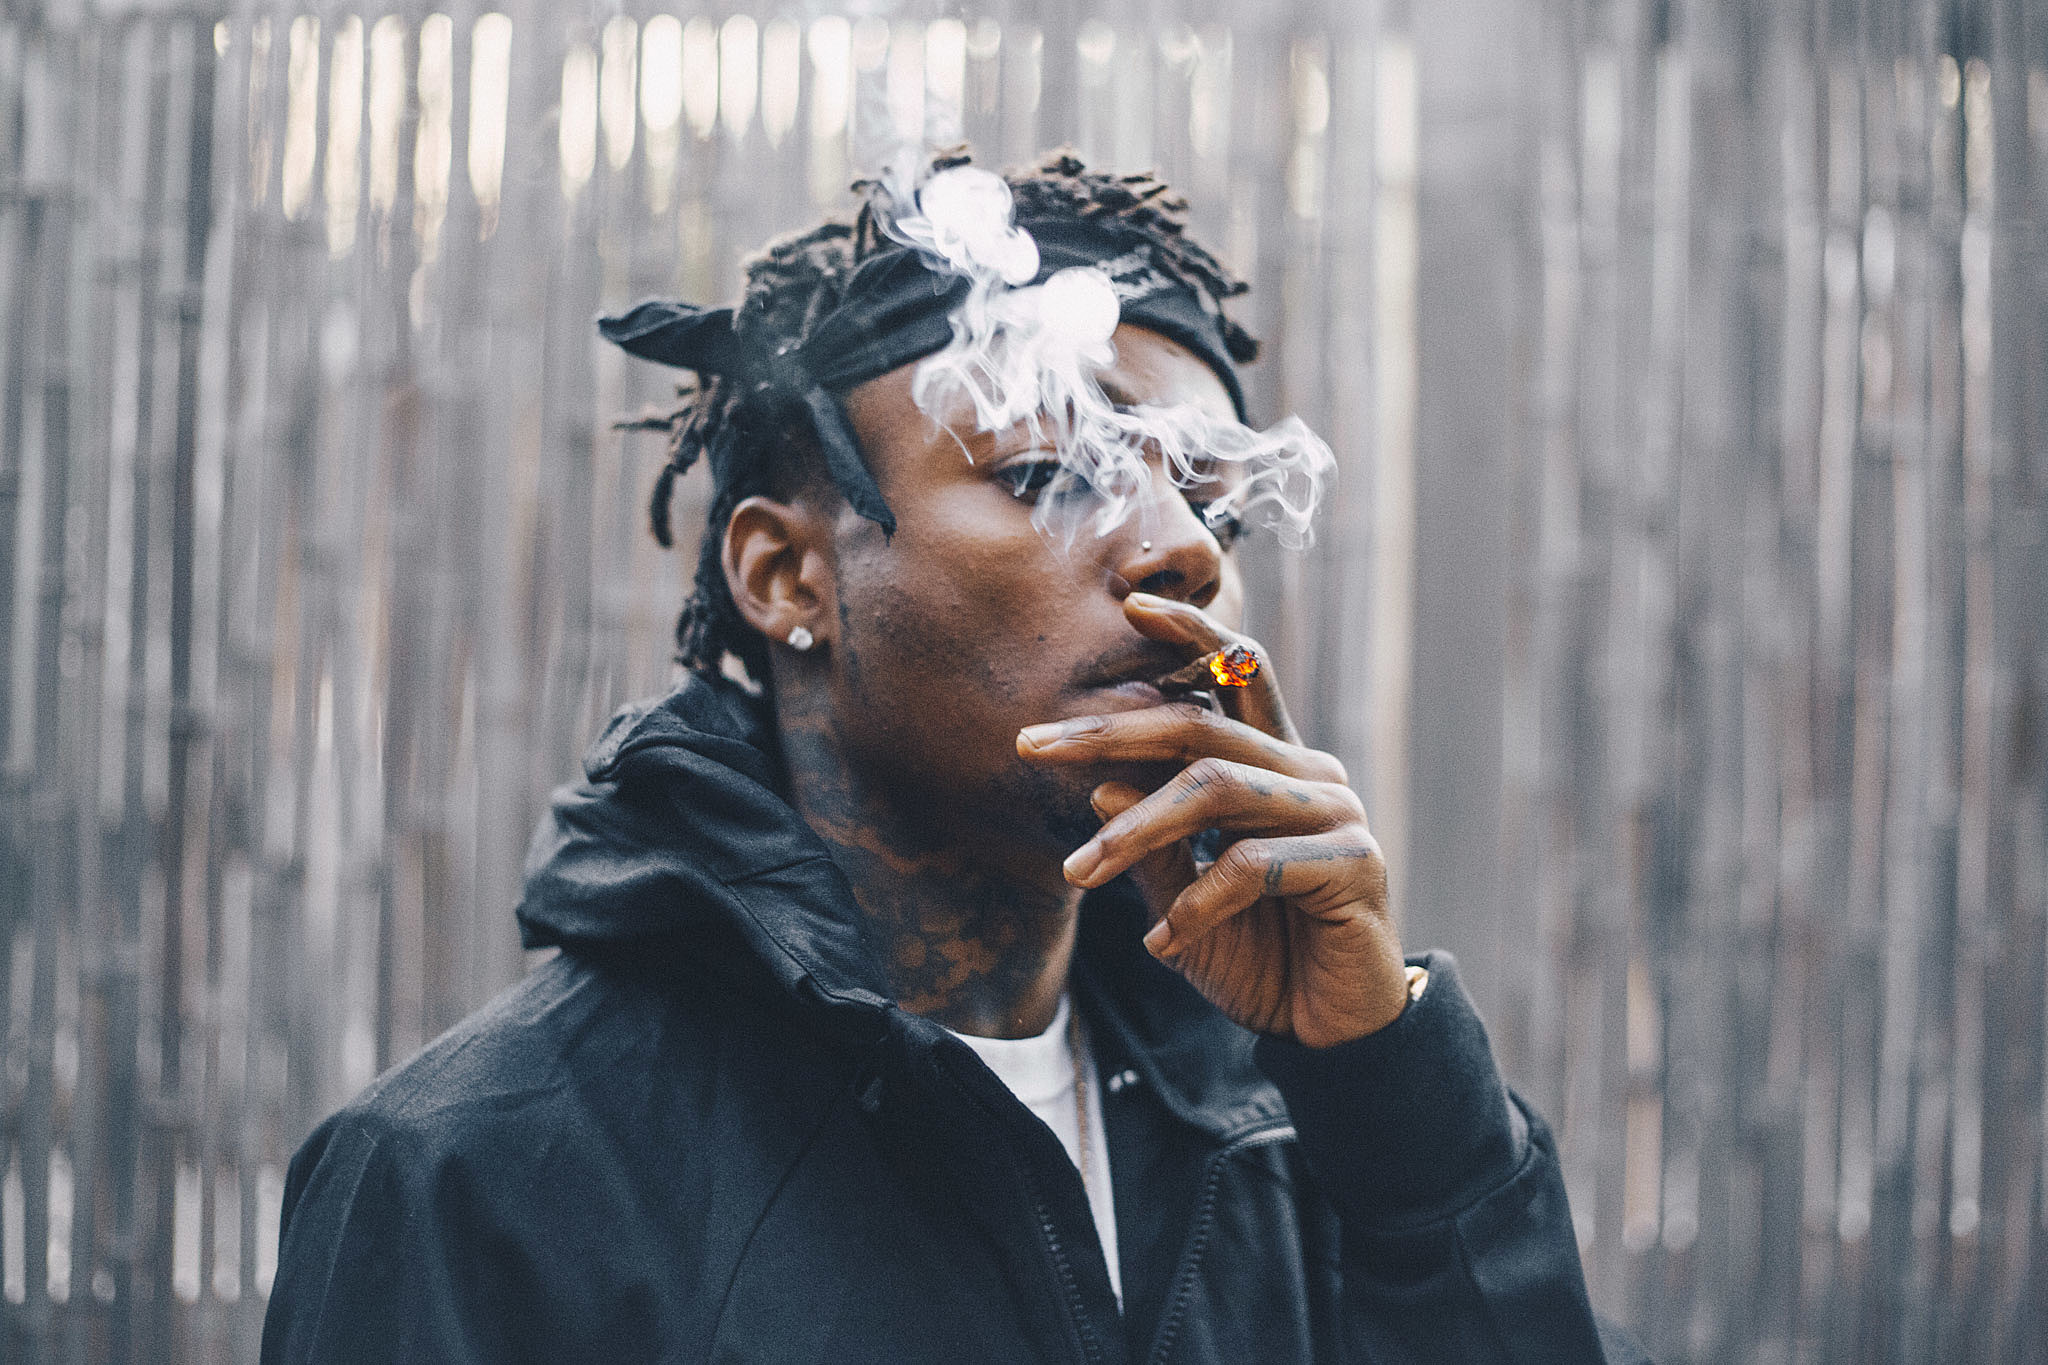 j.i.d wallpapers top free j.i.d backgrounds on jid wallpapers